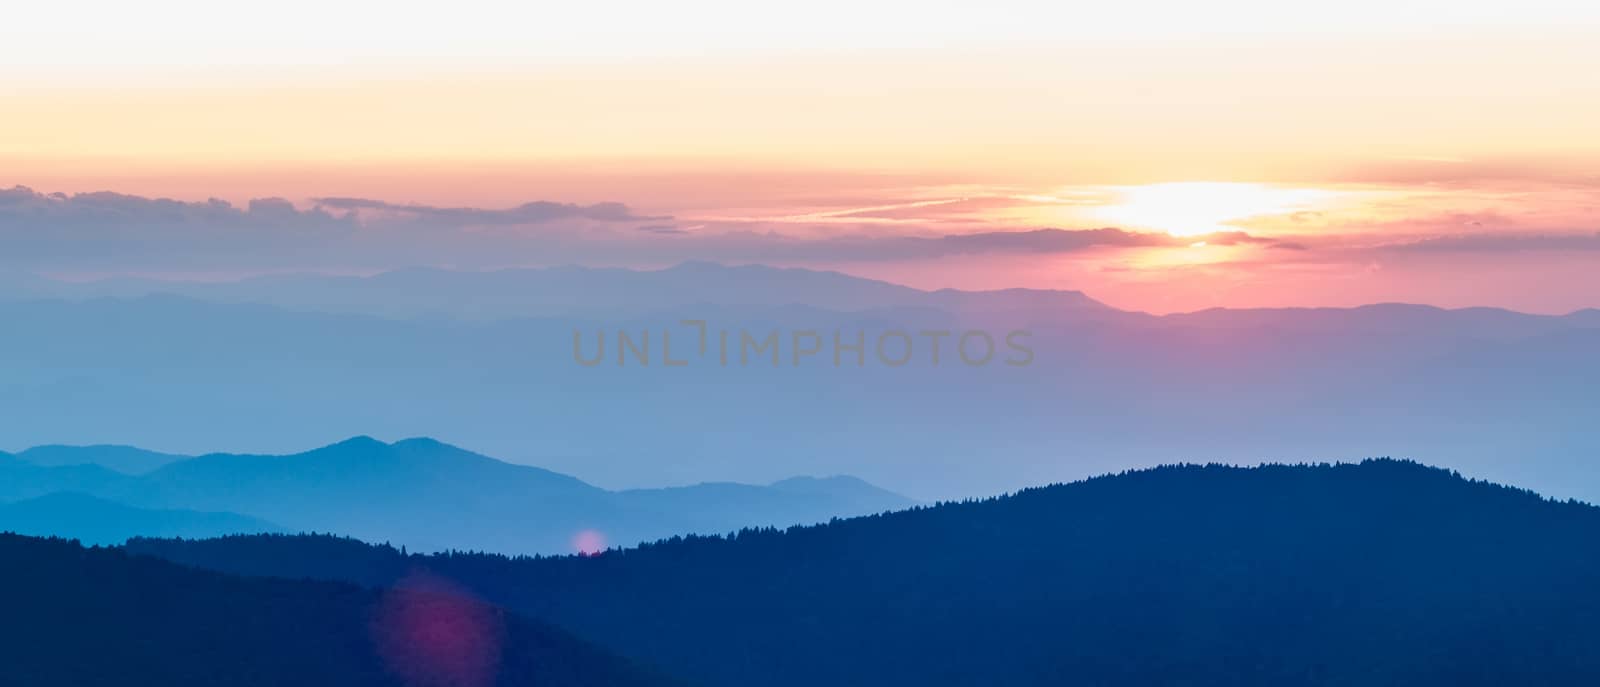 Nice sunset over mountains or north carolina by digidreamgrafix